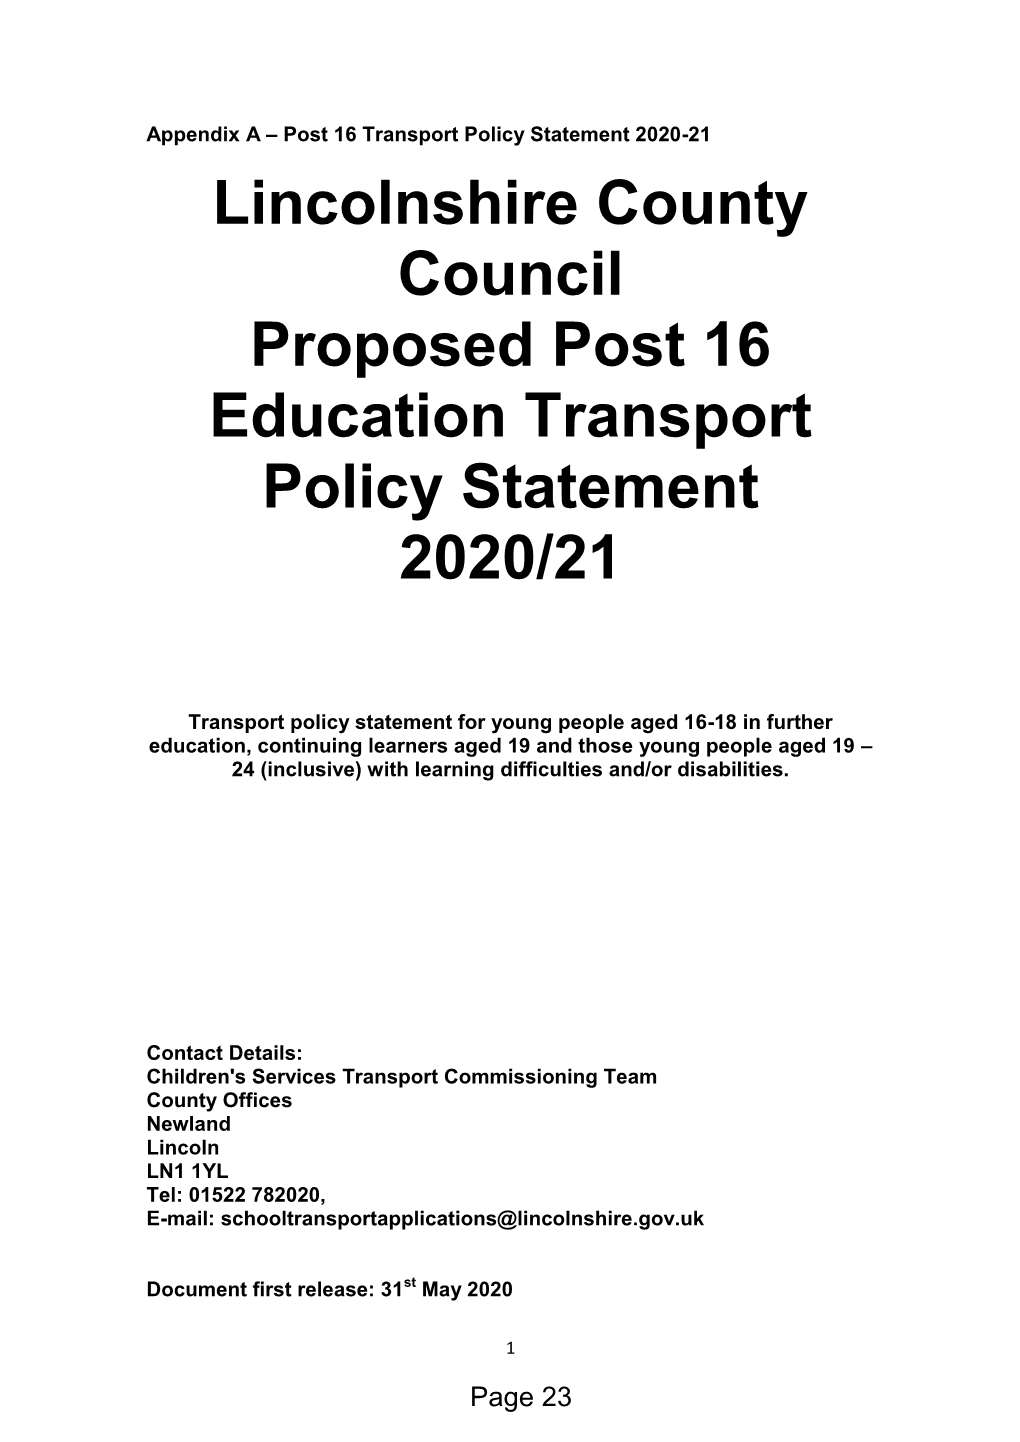 Lincolnshire County Council Proposed Post 16 Education Transport Policy Statement 2020/21